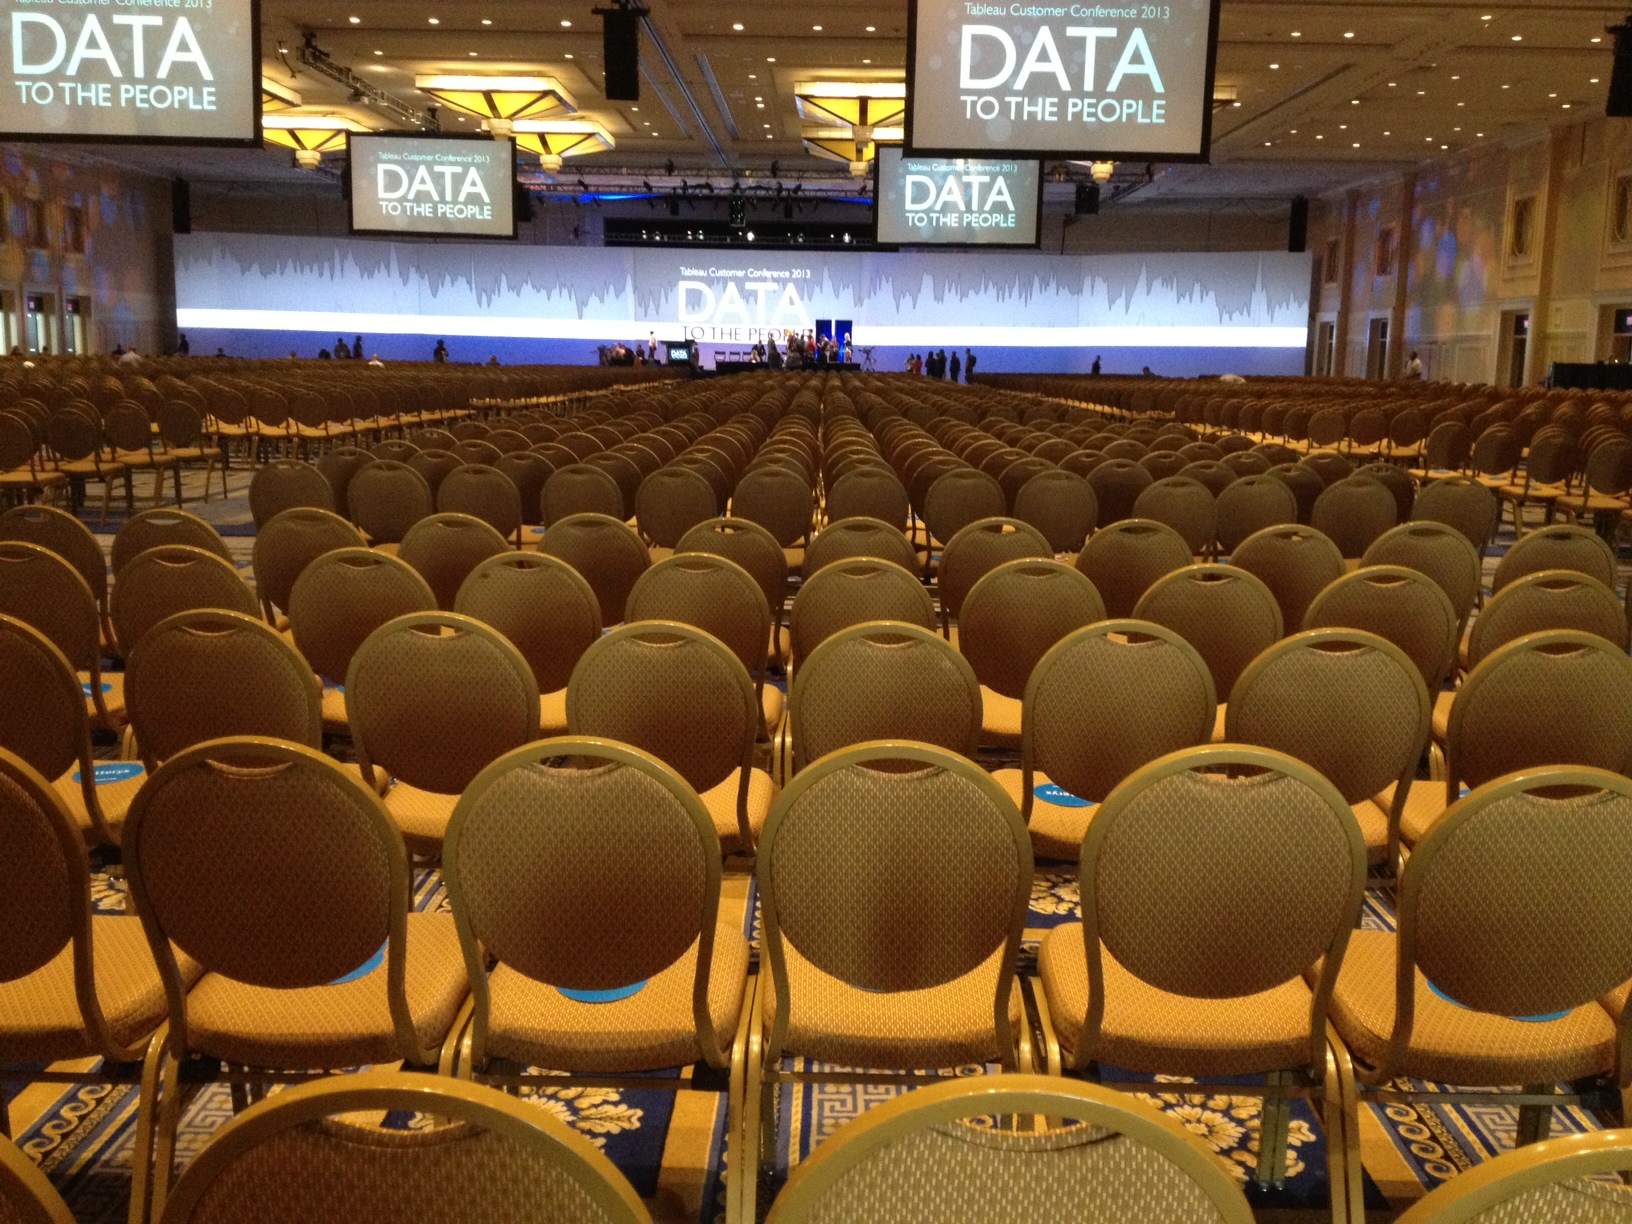 conference-hall-empty-gaylord-national-convention-center-september-2013-photo-by-joe-mckendrick.jpg